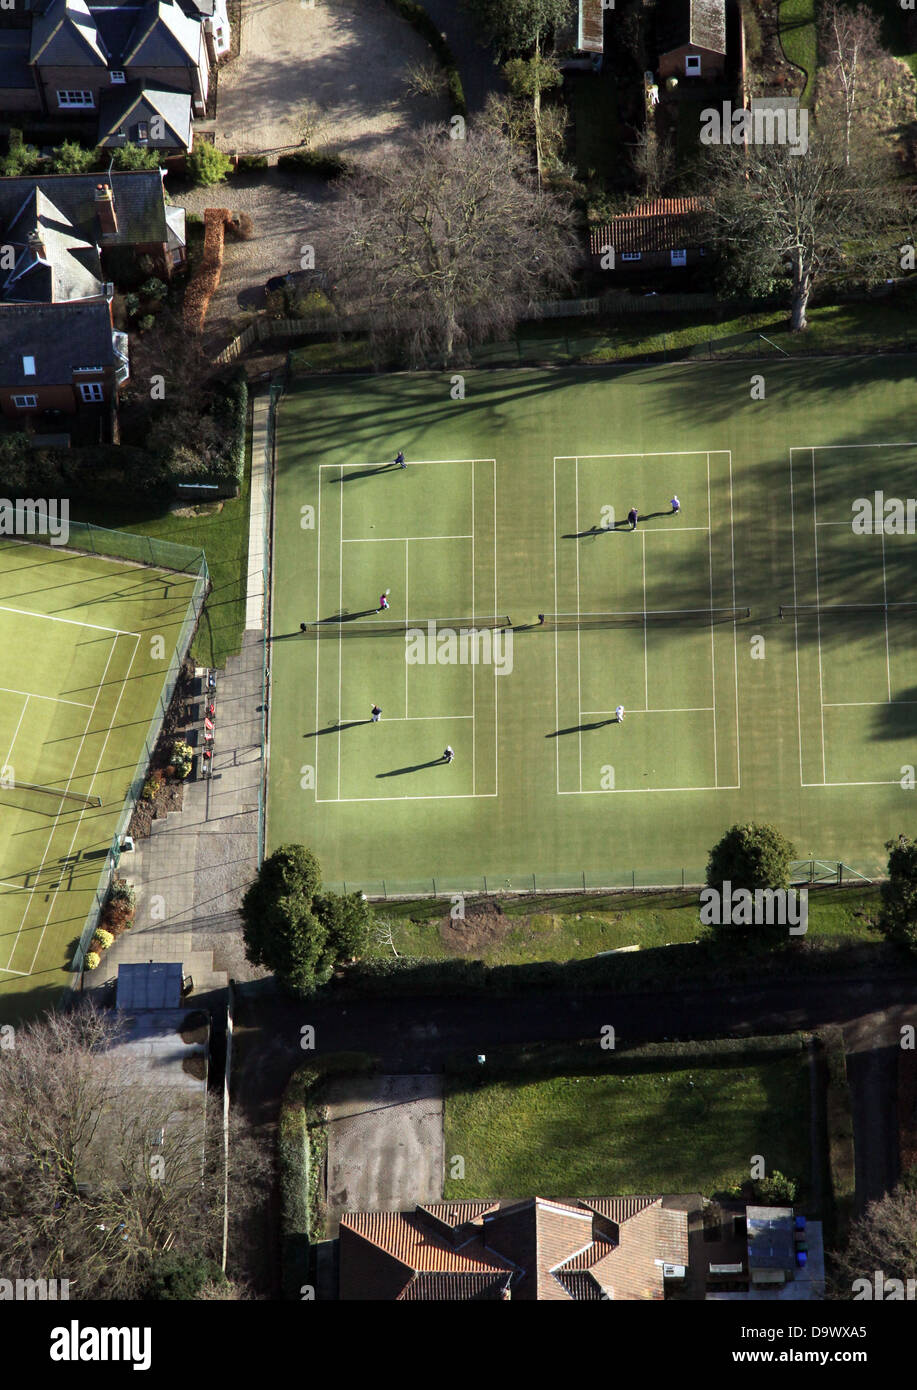 aerial view of Beverley & East Riding tennis club courts with people playing Stock Photo